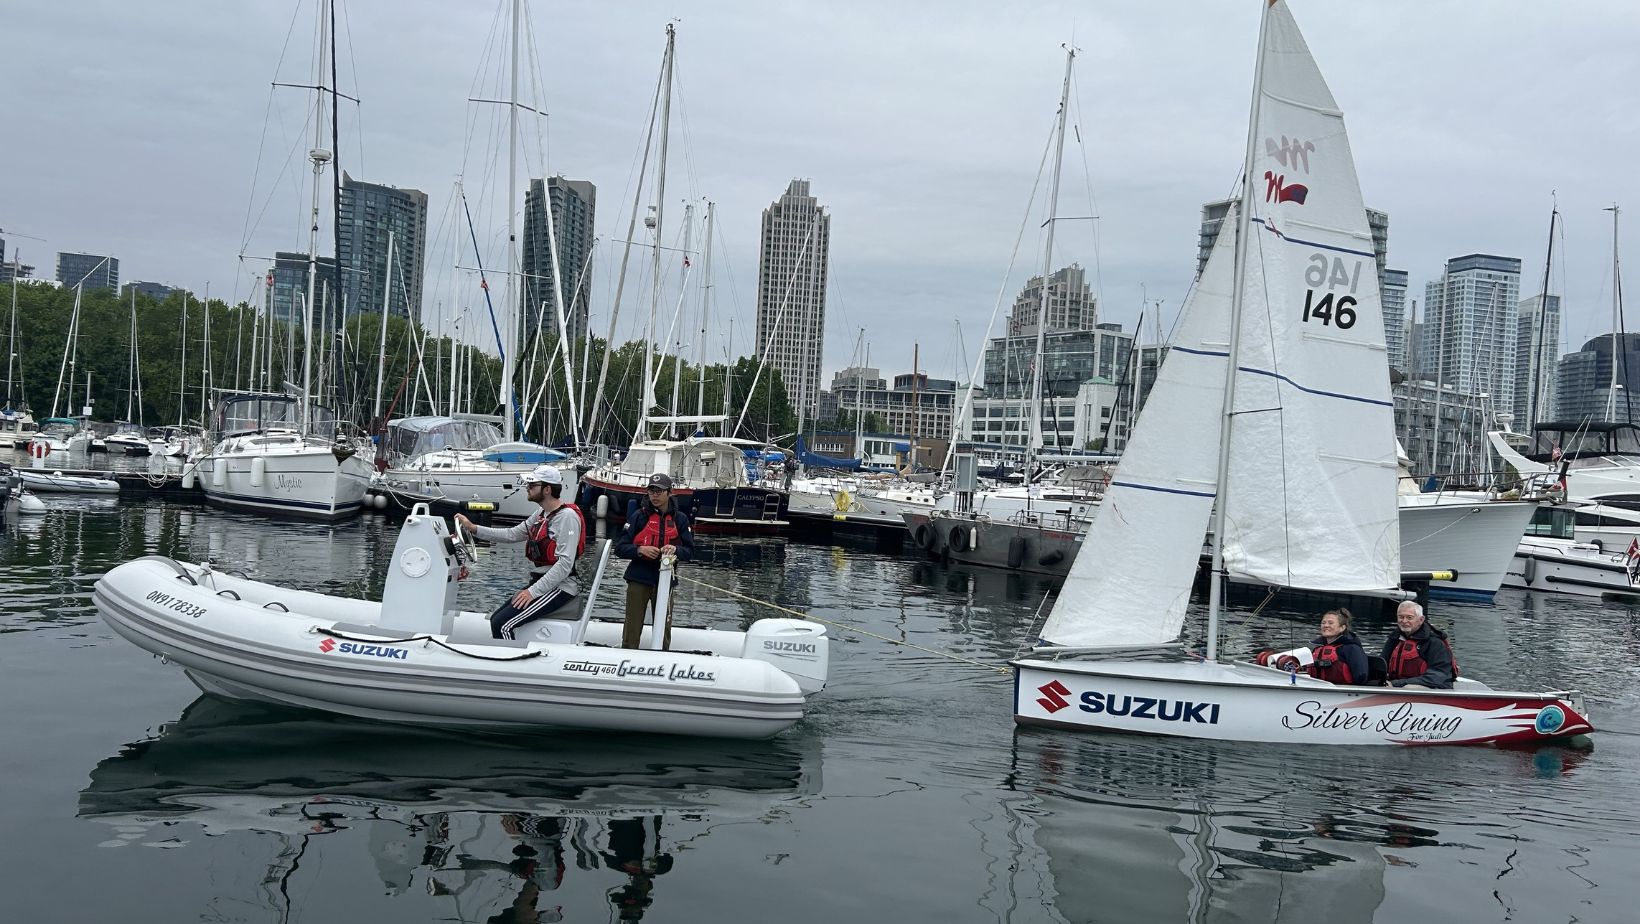 Suzuki Canada To Support Able Sail Toronto & Mobility Cup Events Through 2026